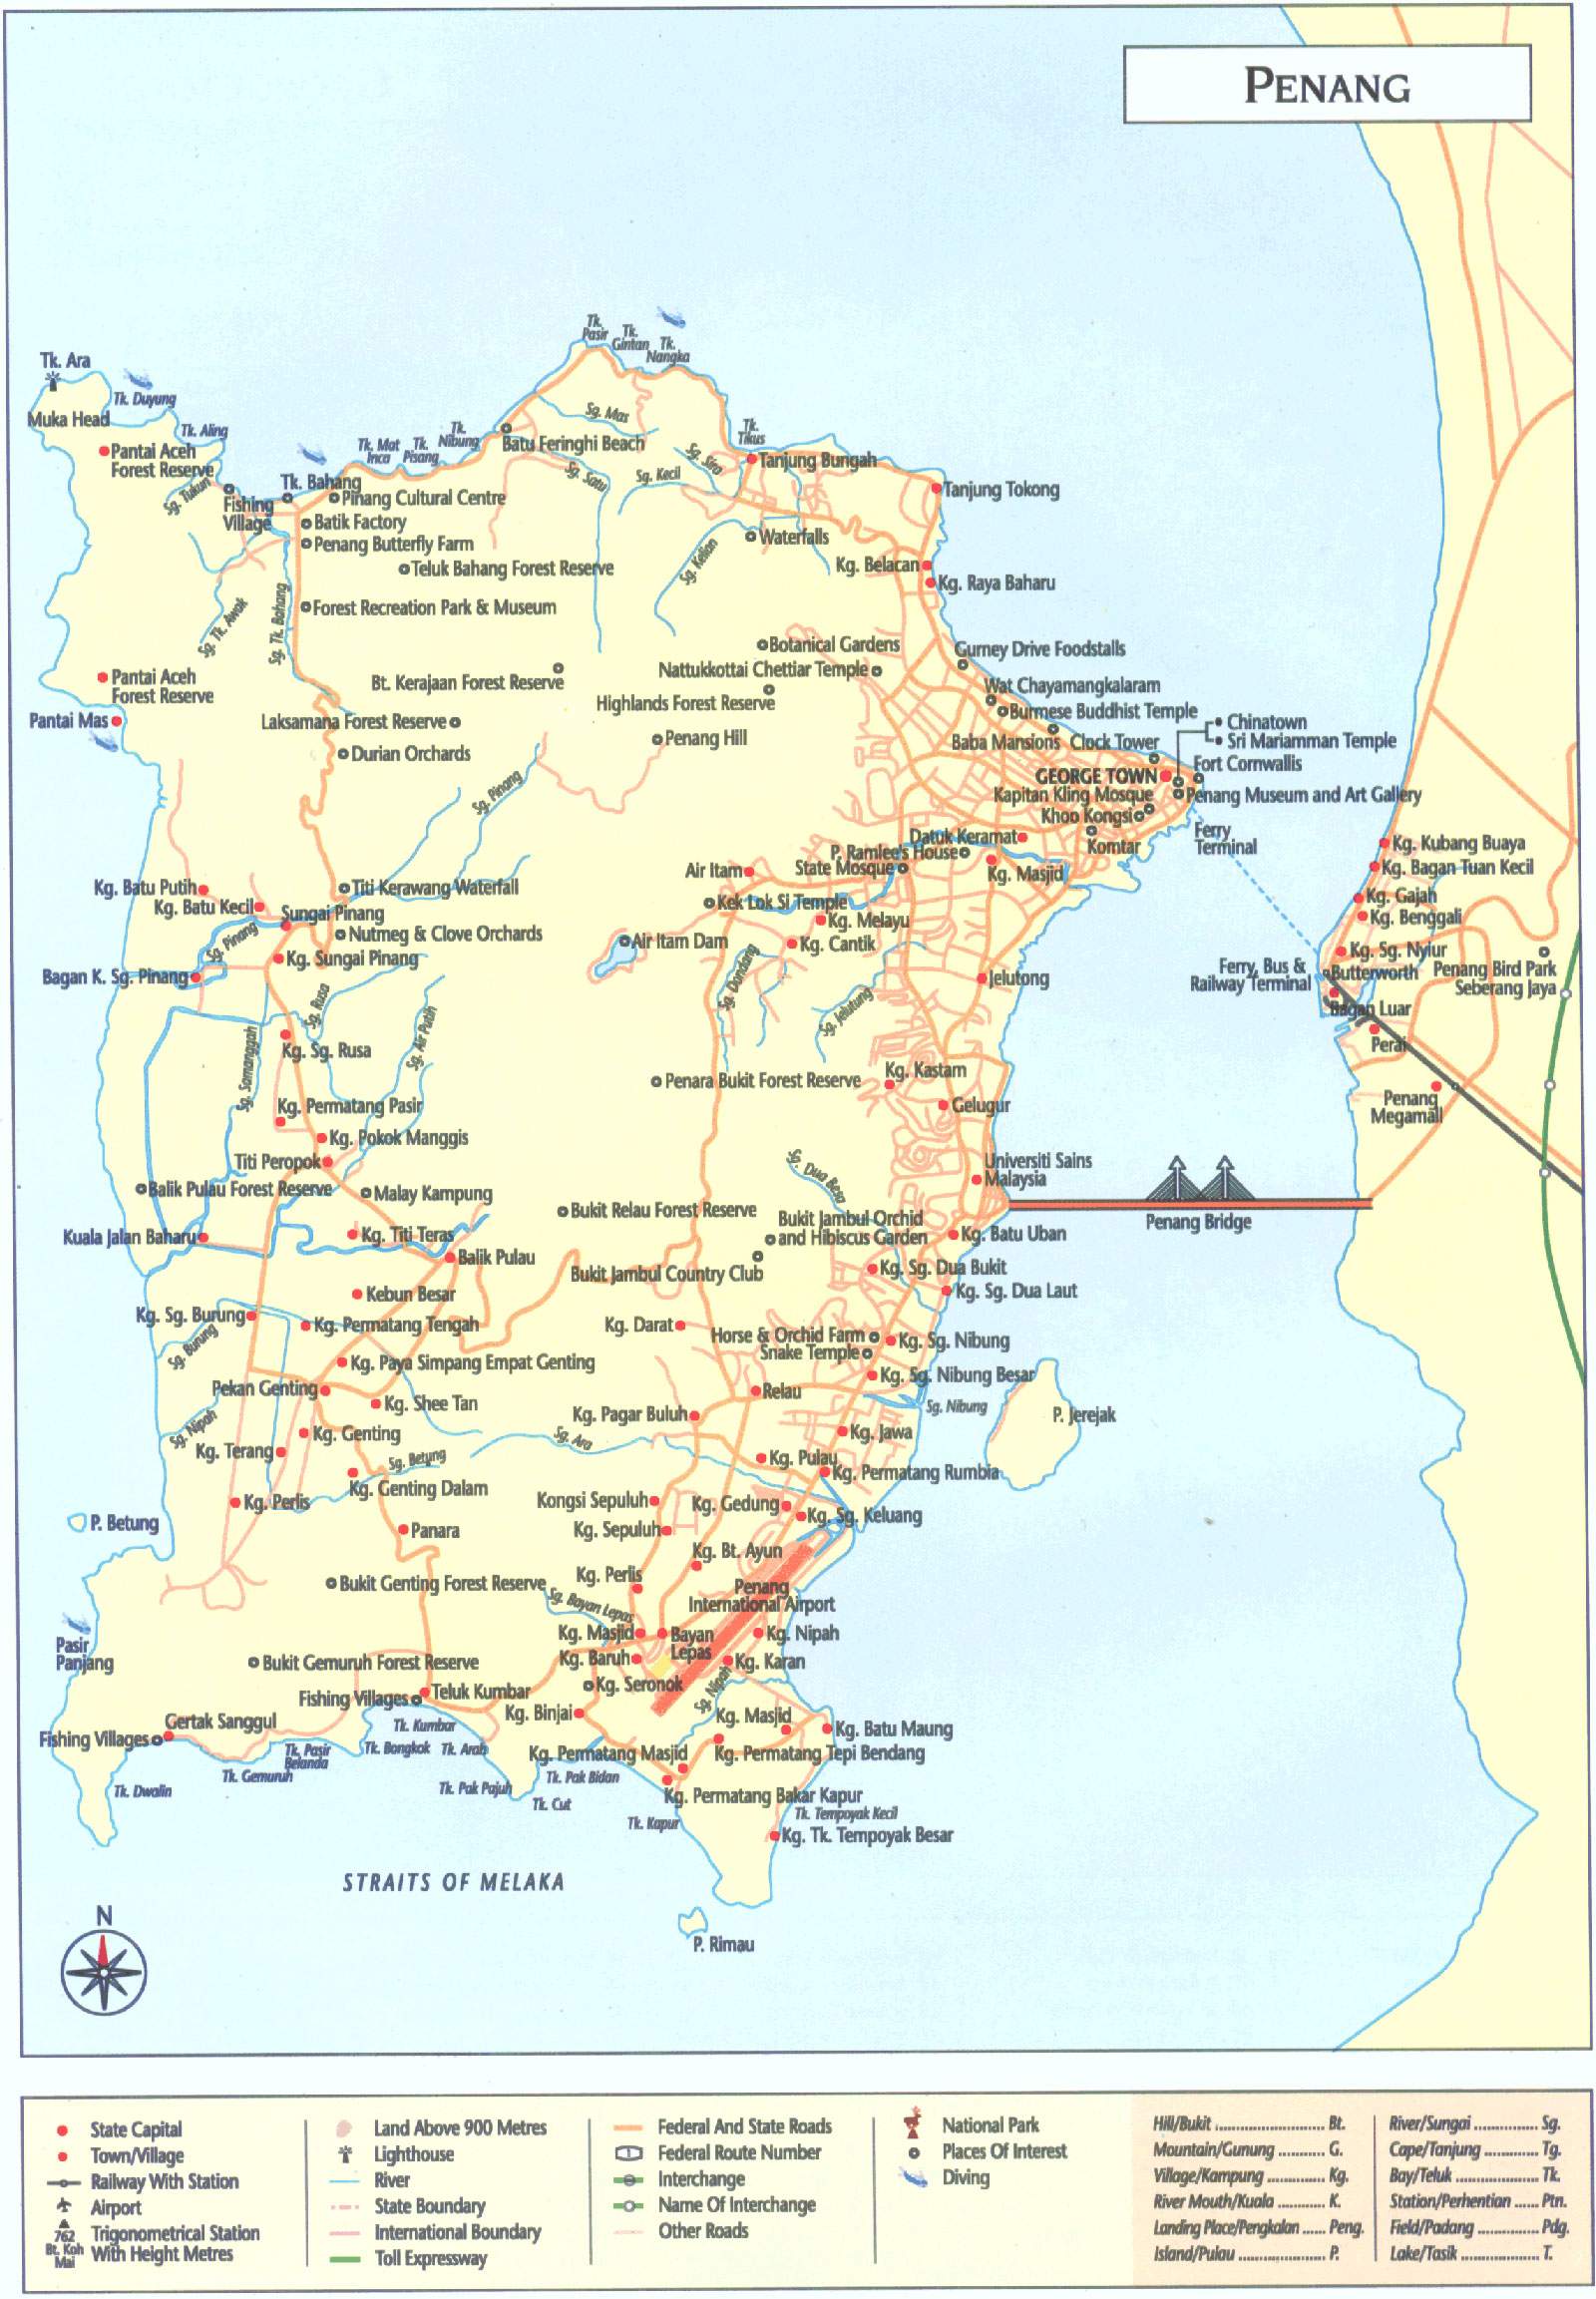 Penang Map With Tourist Spots - malaycece